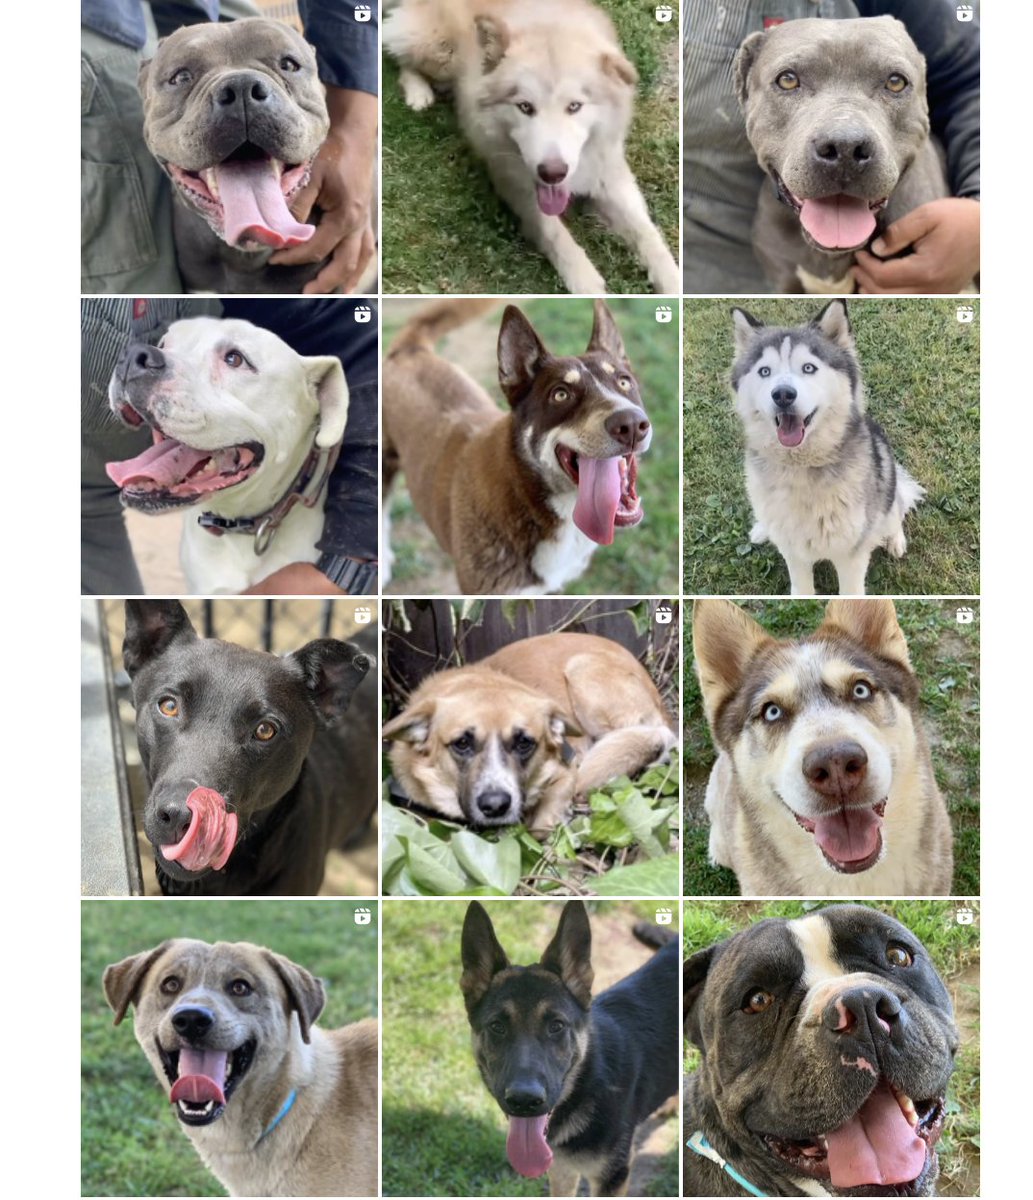 104 dogs have been placed on the list to be killed in Riverside CA with a deadline of 4PM TODAY Thursday April 25. In your worse nightmare you wouldn't think this would be possible, but it is. Please let's help get as many to safety as possible. Repost and share the original post